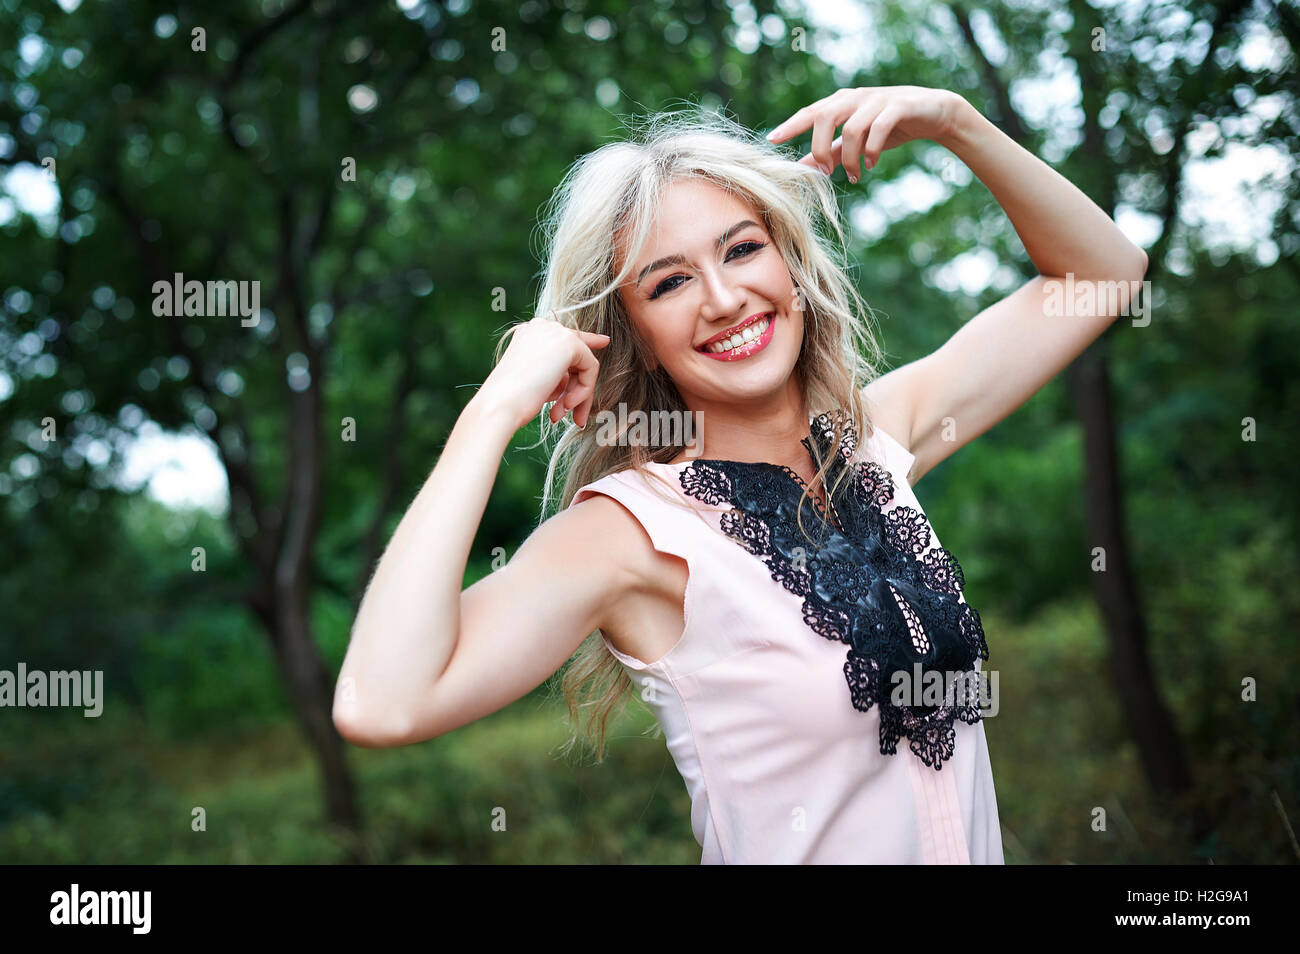 woman with long blond hair posing in summer park Stock Photo